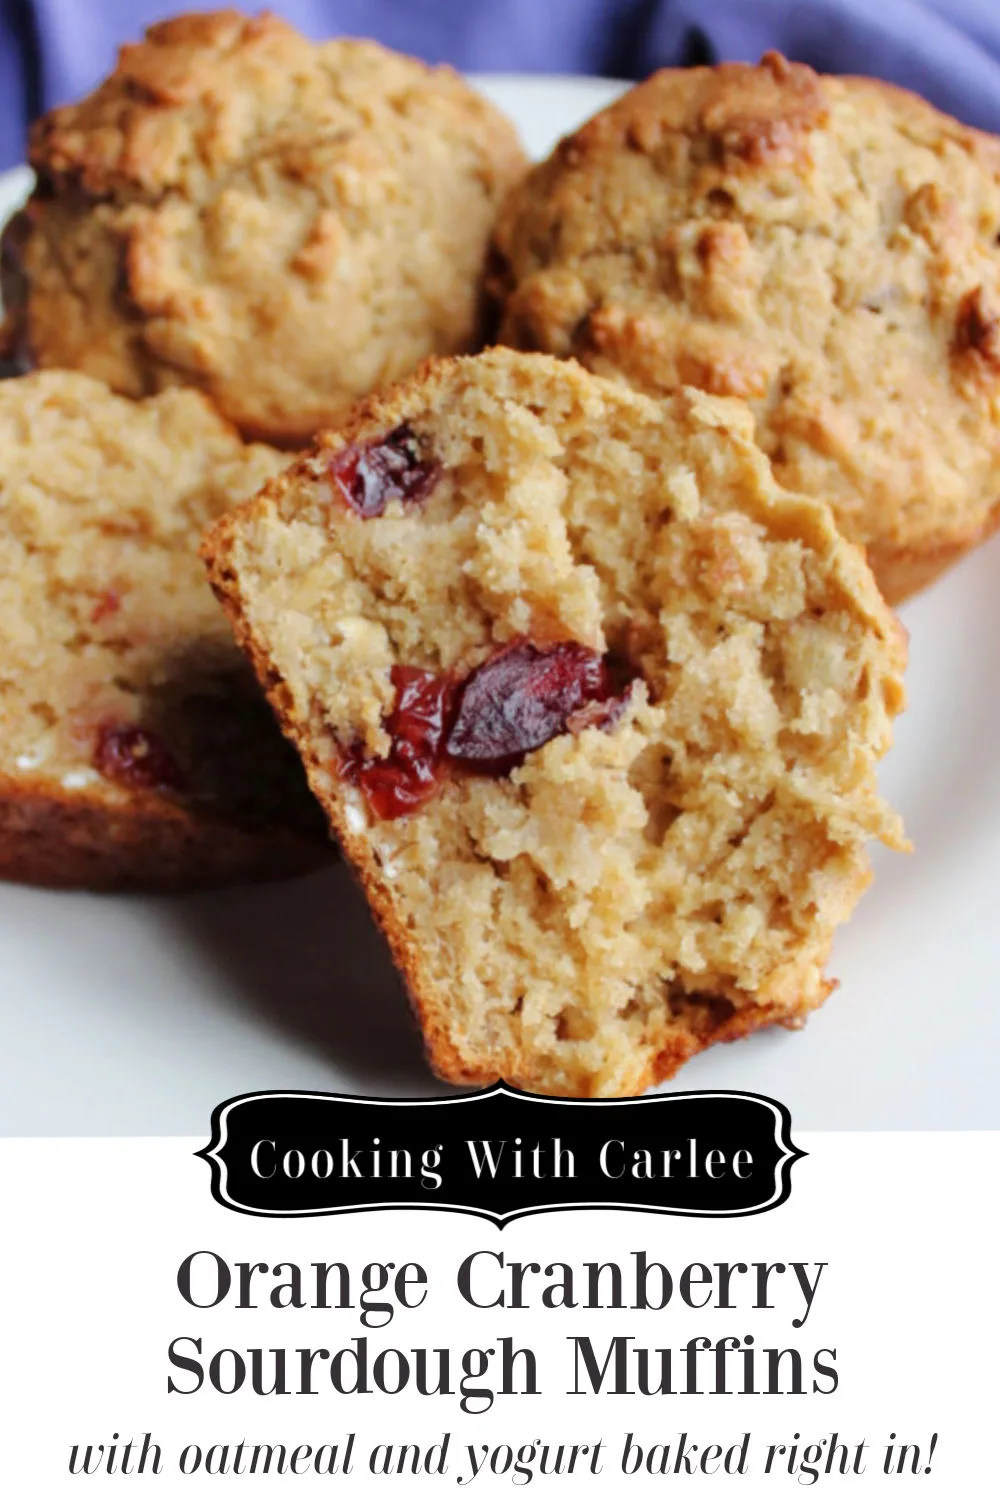 Orange and cranberries come together with just a hint of spice in these oatmeal sourdough muffins. They are a perfect grab and go breakfast or fun healthier brunch treat. 